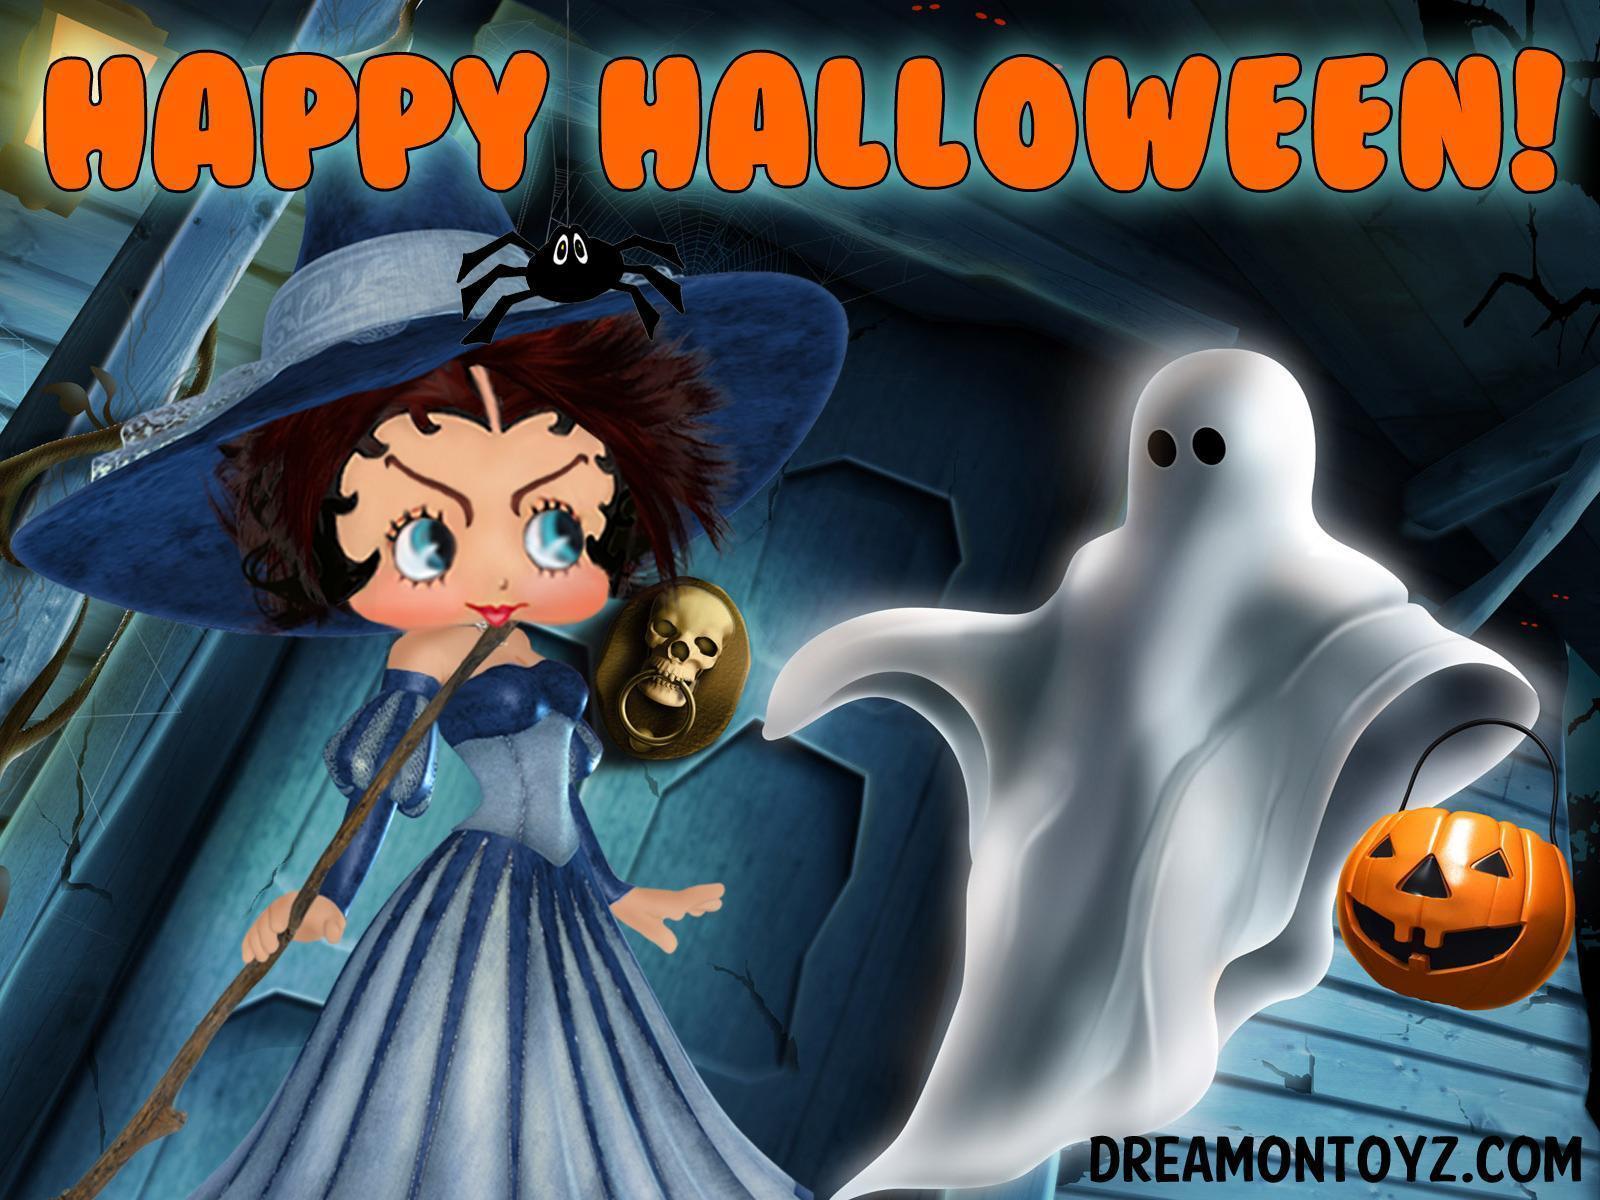 Betty Boop Pictures Archive: Halloween wallpapers with Betty Boop